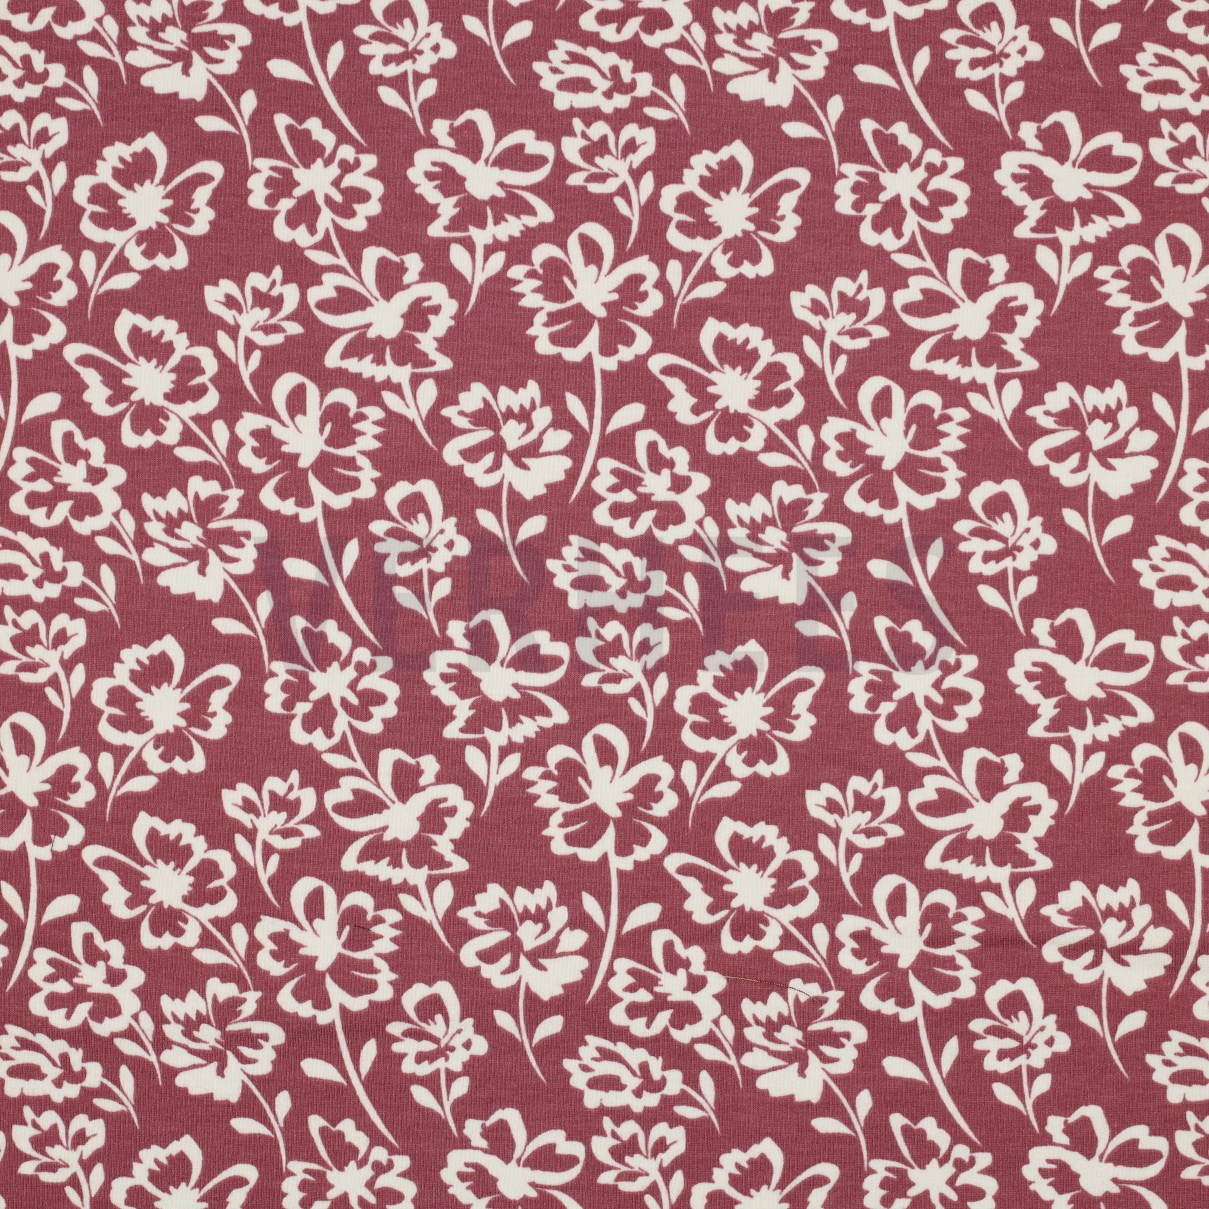 SOFT SWEAT FLOWERS ROSEWOOD (high resolution)